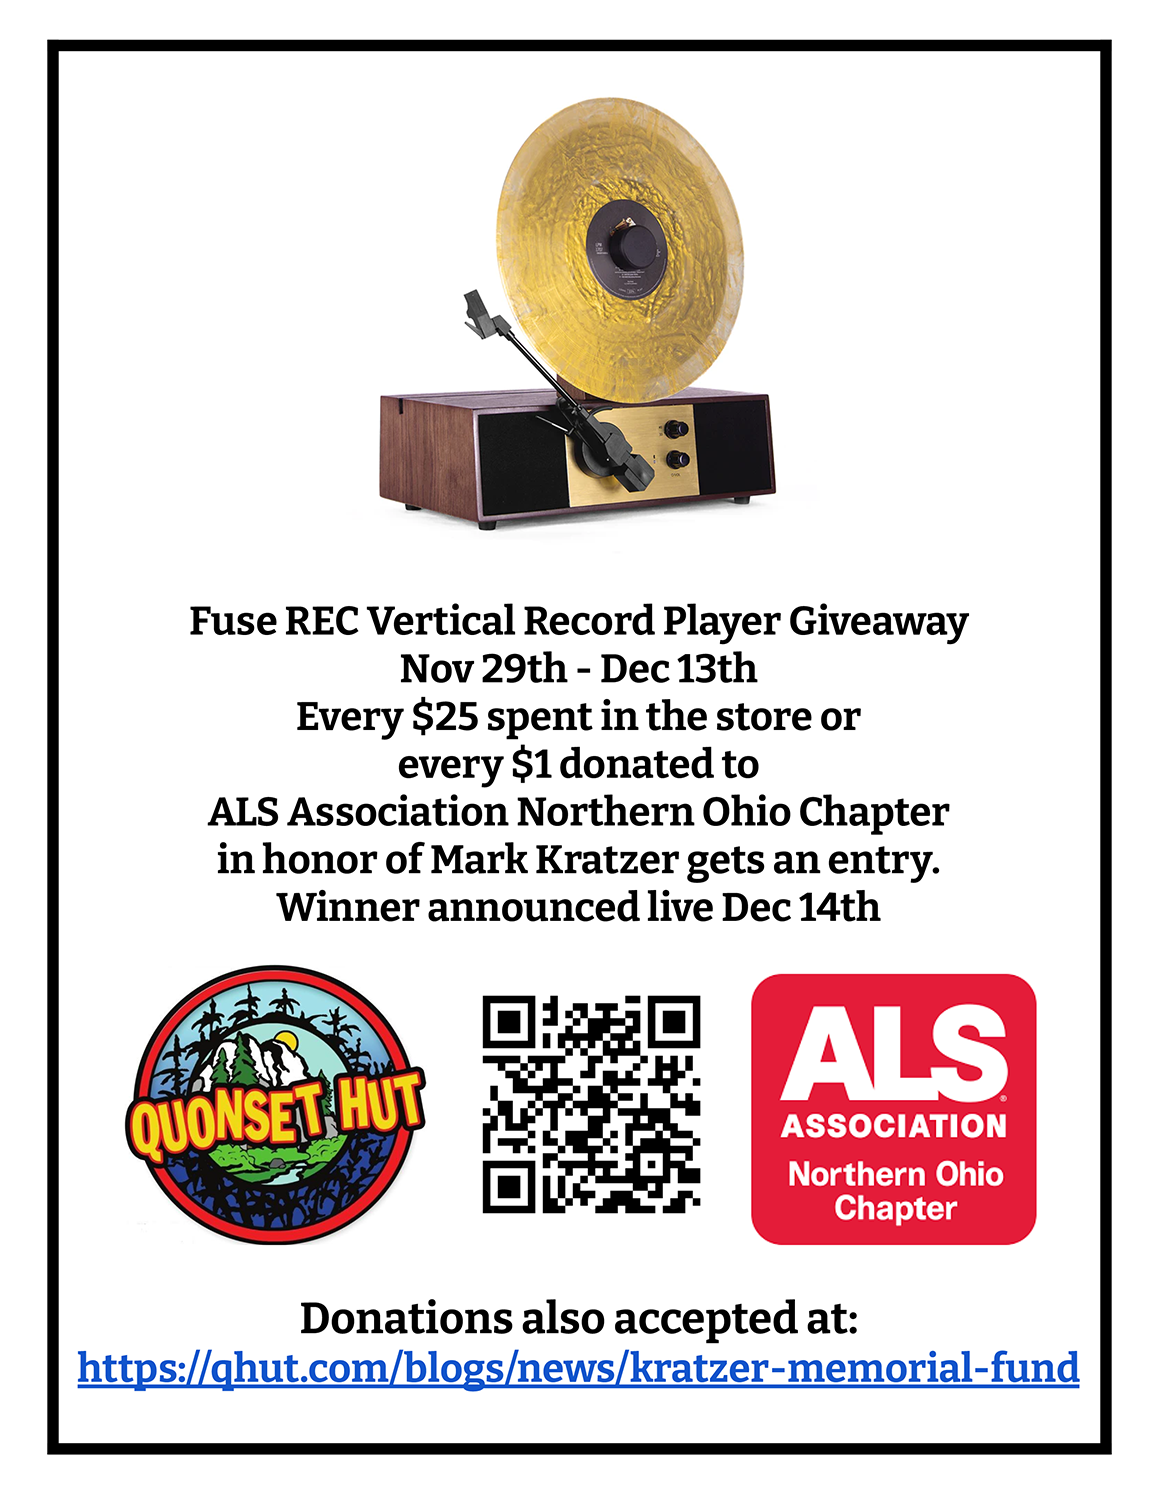 Fuse REC vertical record player giveaway poster